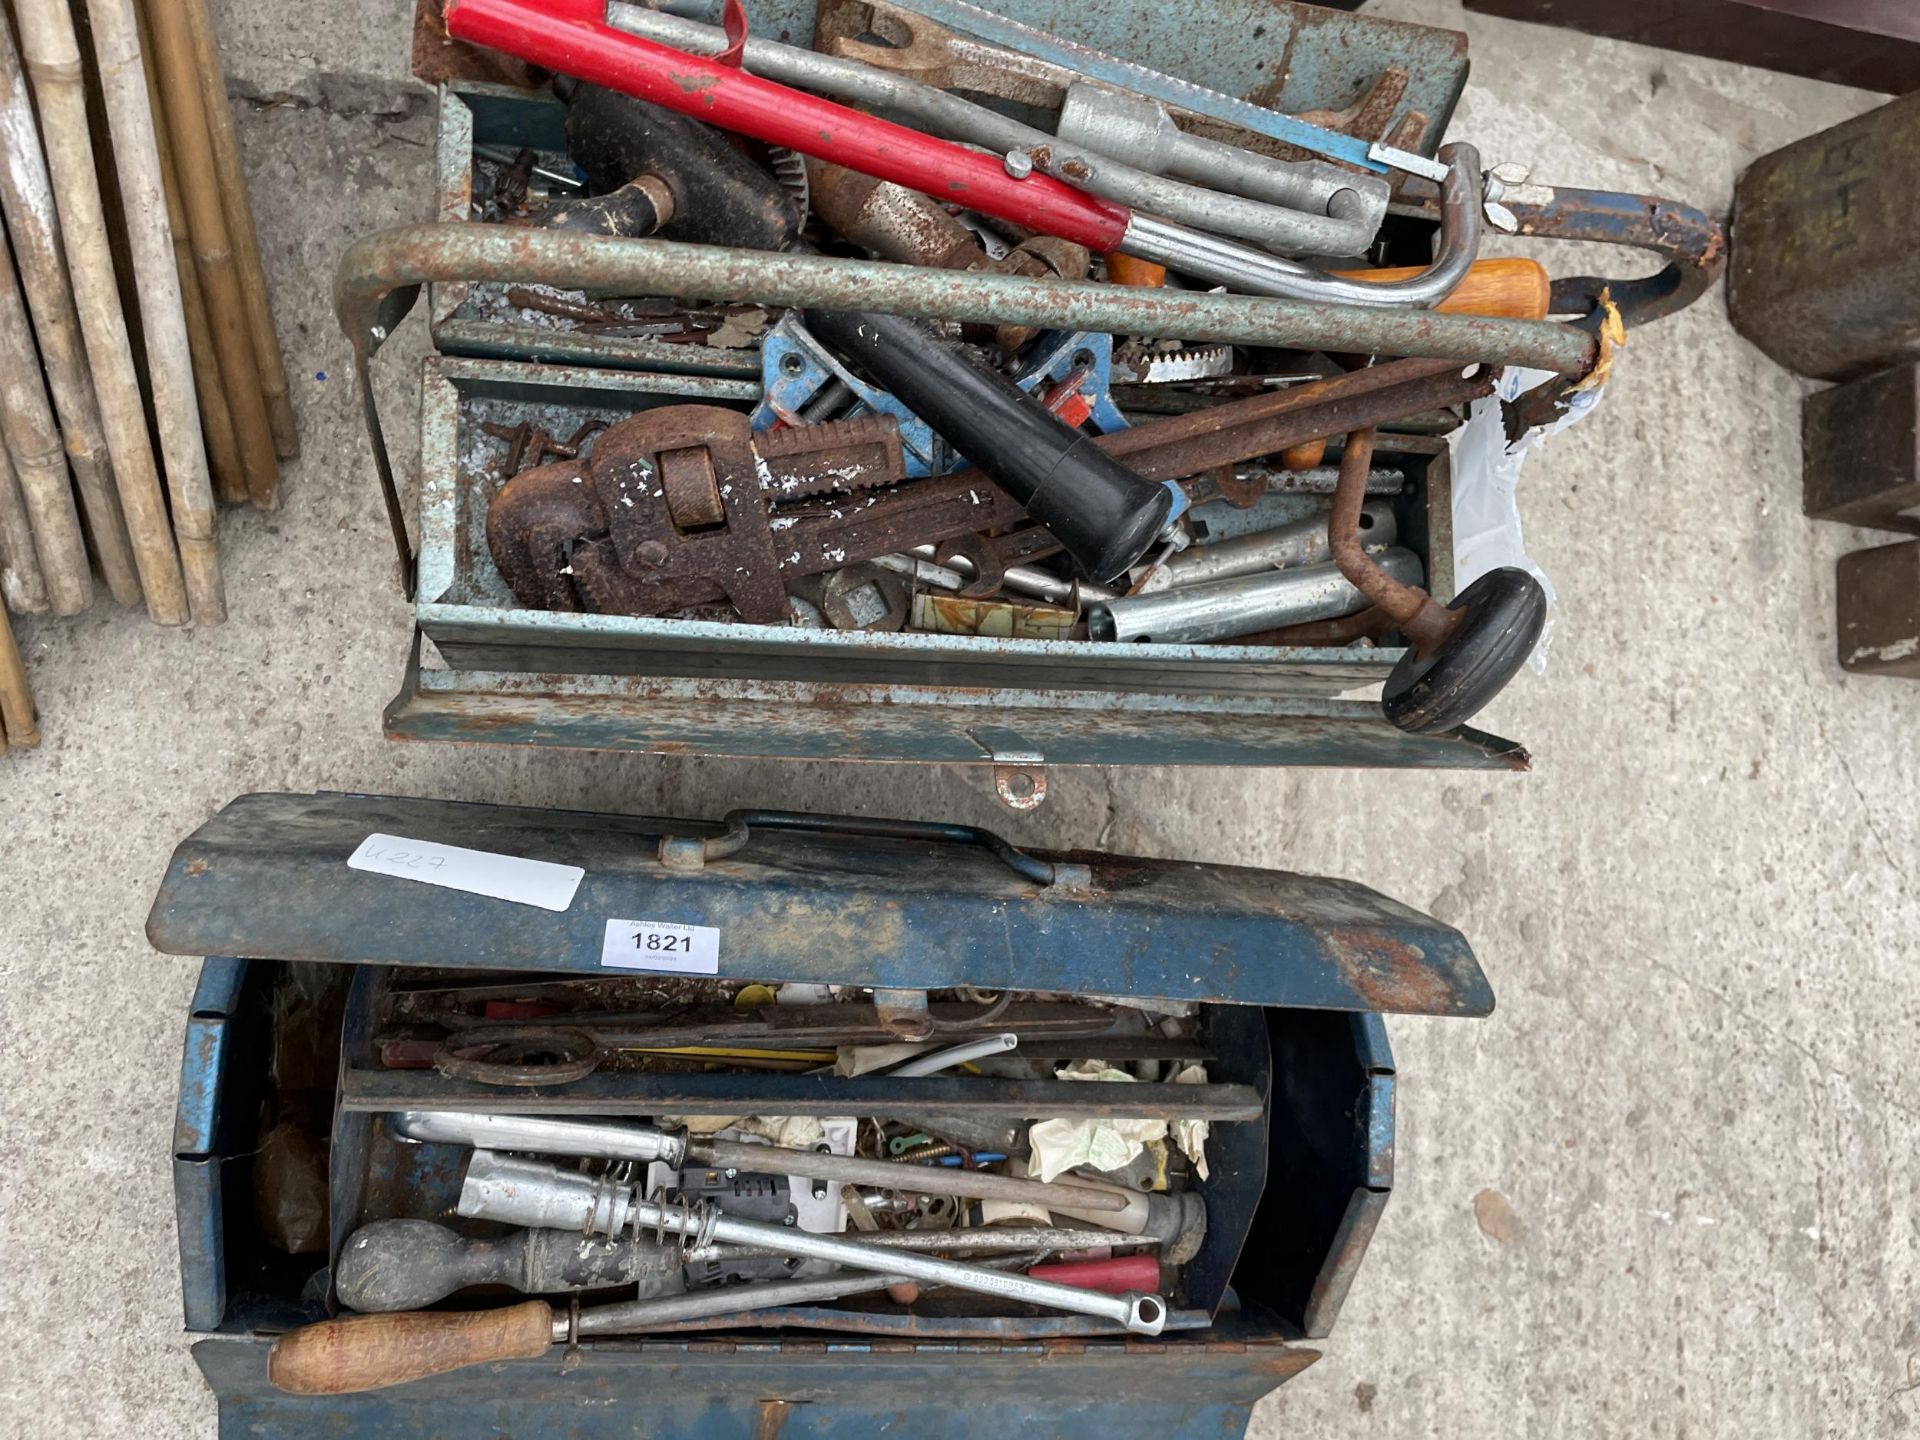 THREE VARIOUS TOOL BOXES AND AN ASSORTMENT OF HAND TOOLS TO INCLUDE STILSENS, SCREW DRIVERS AND A - Image 2 of 3